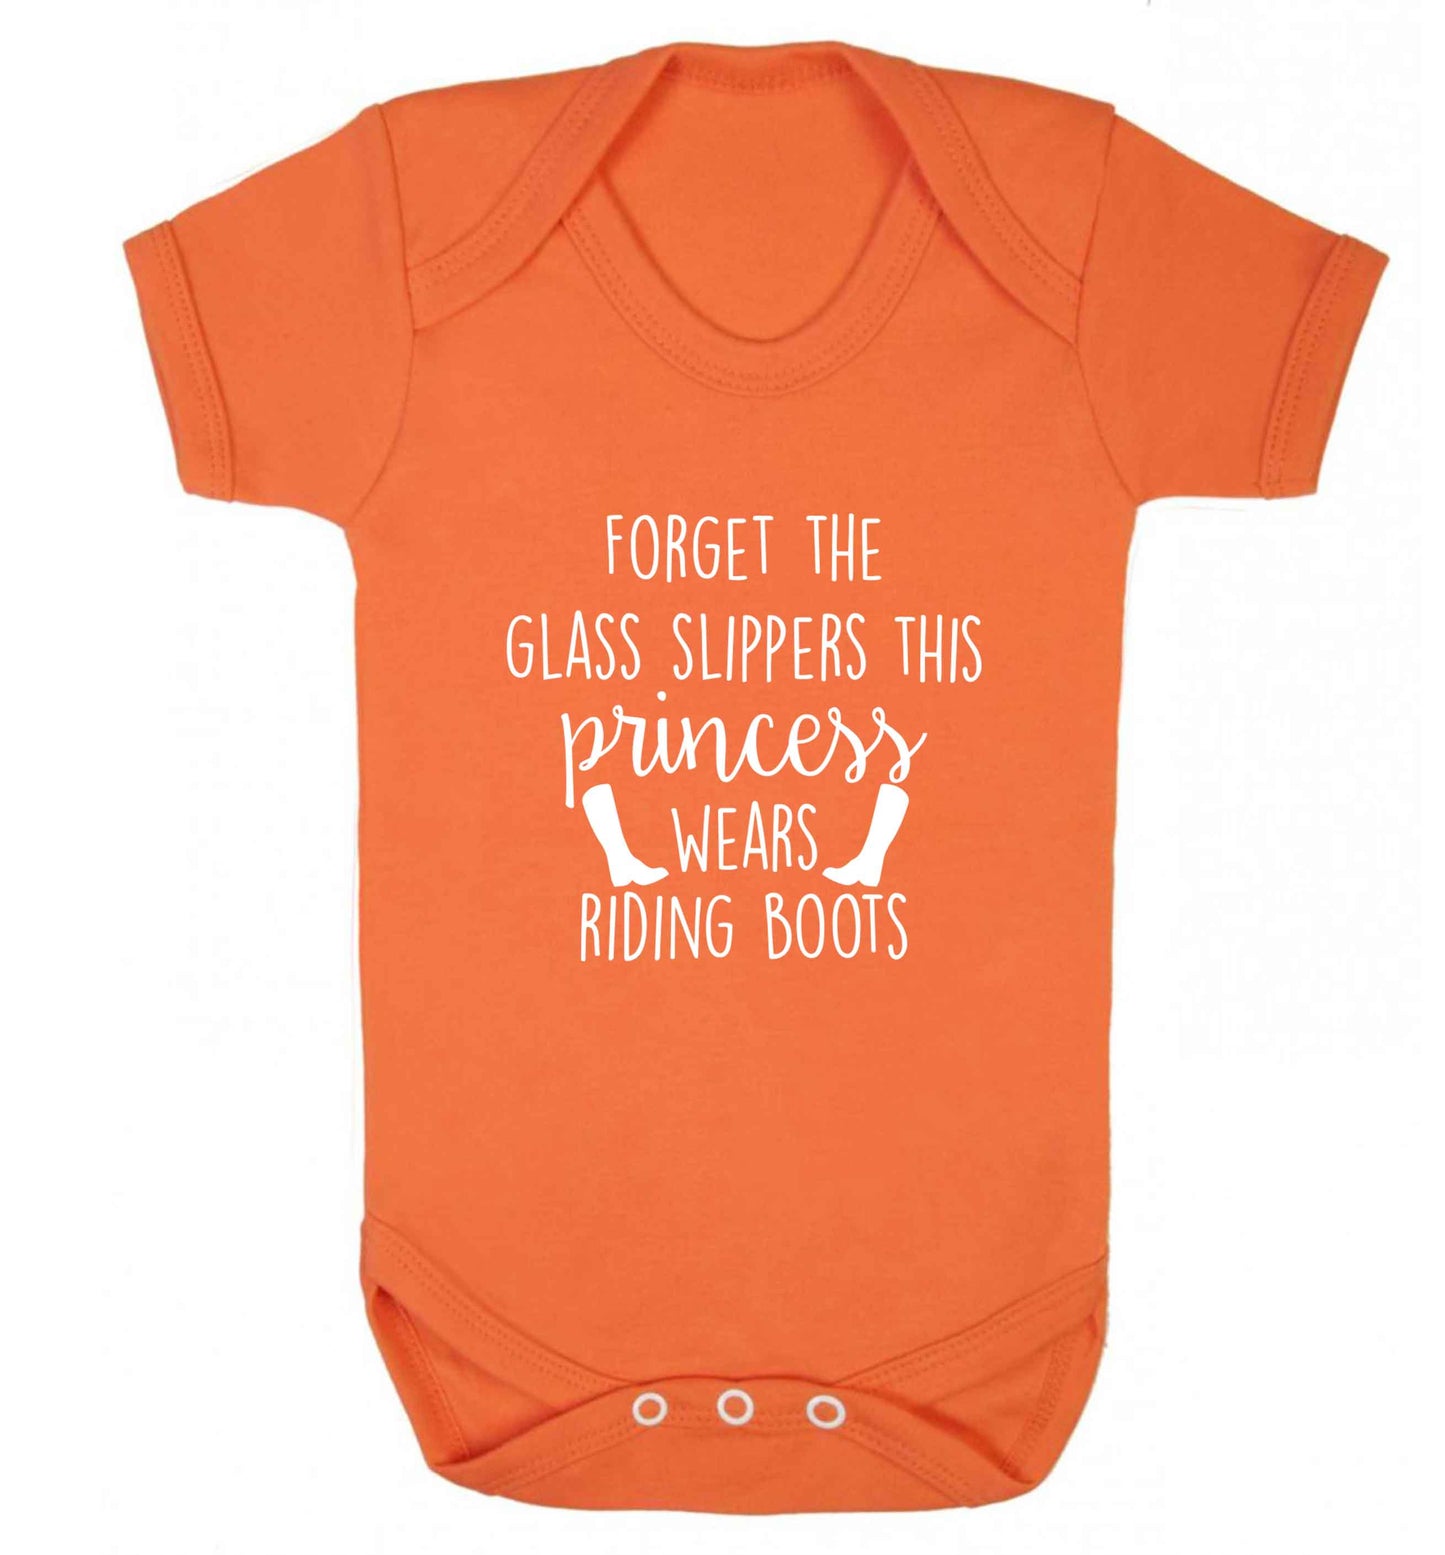 Forget the glass slippers this princess wears riding boots baby vest orange 18-24 months